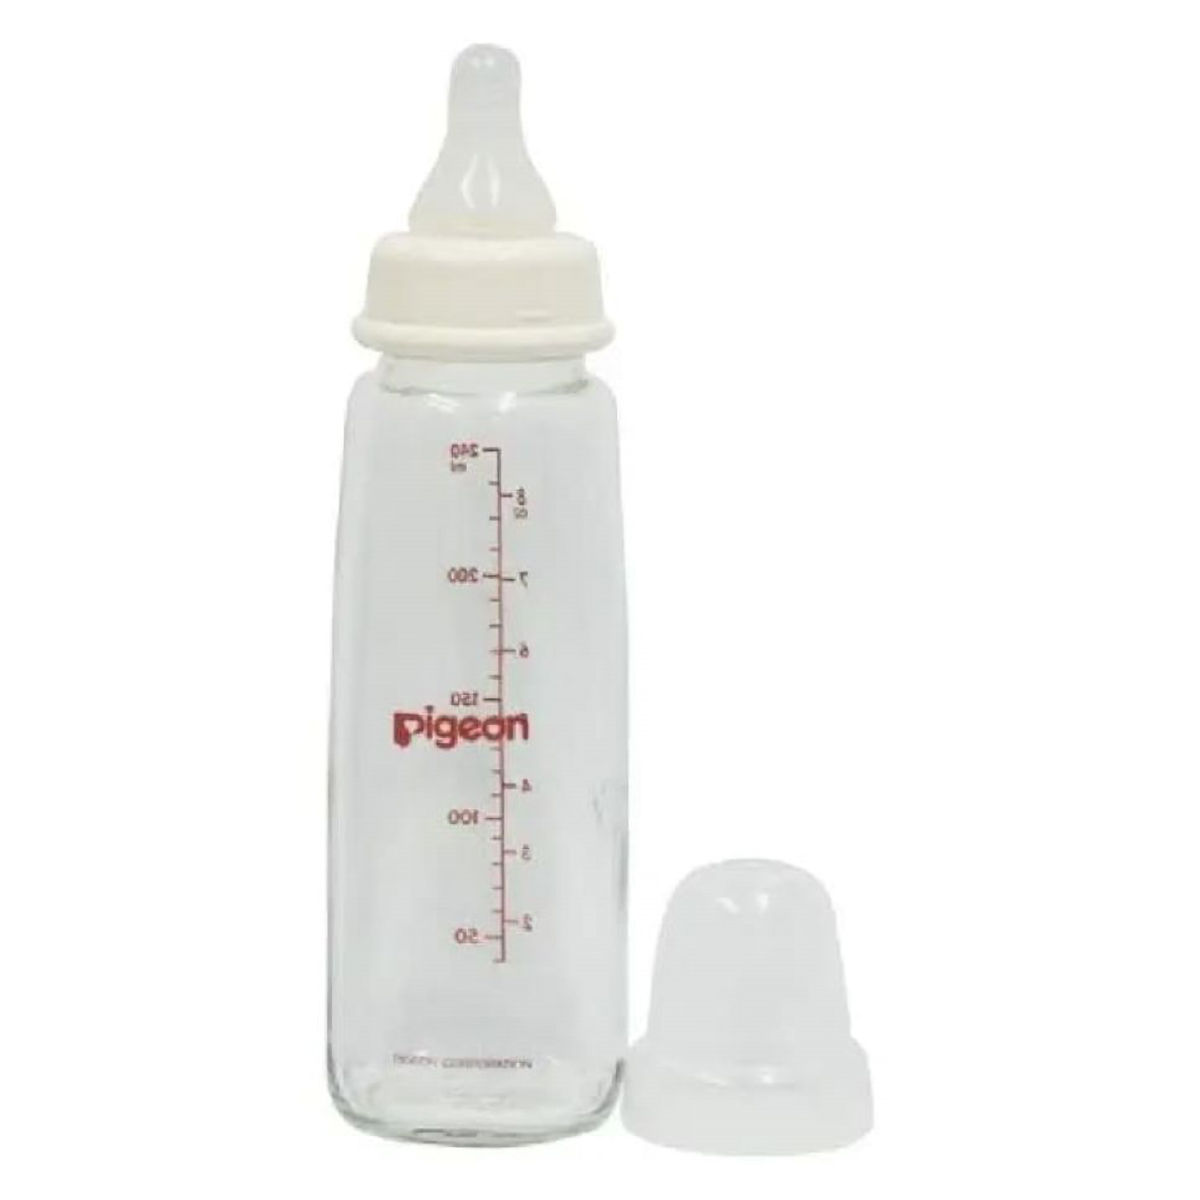 Pigeon Glass Bottle, 240 ml, Pack of 1 